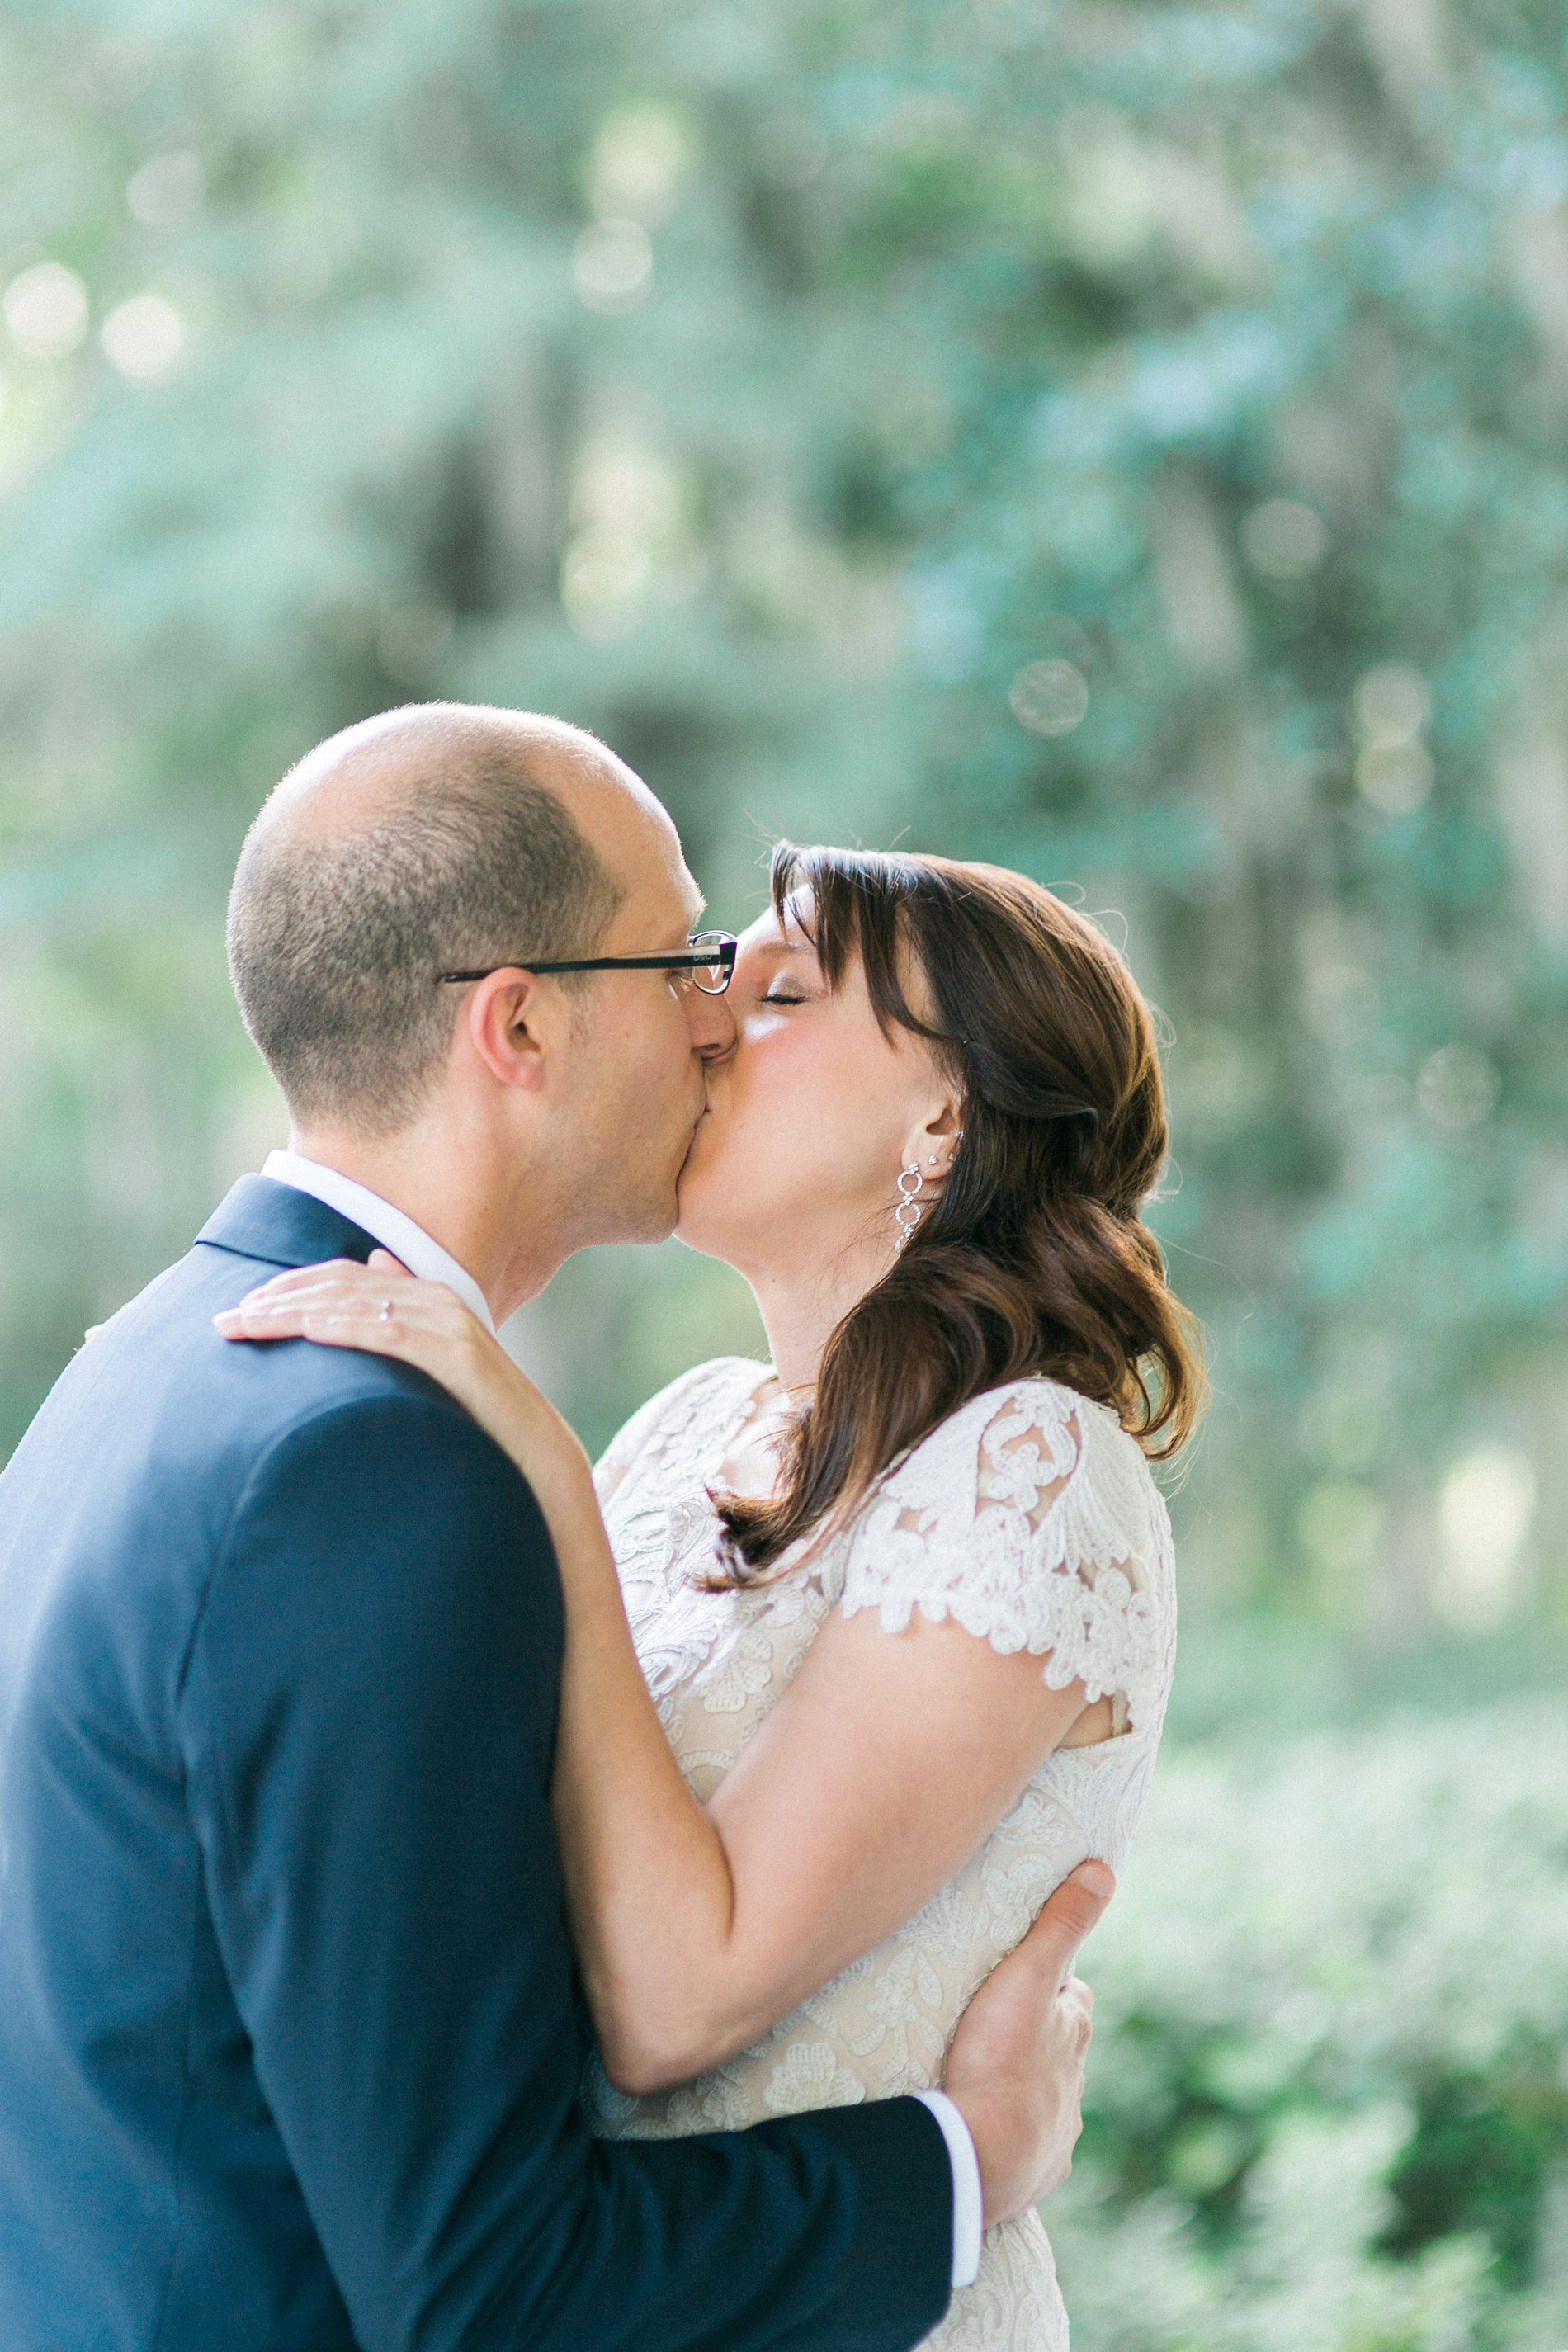 Intimate elopement photography